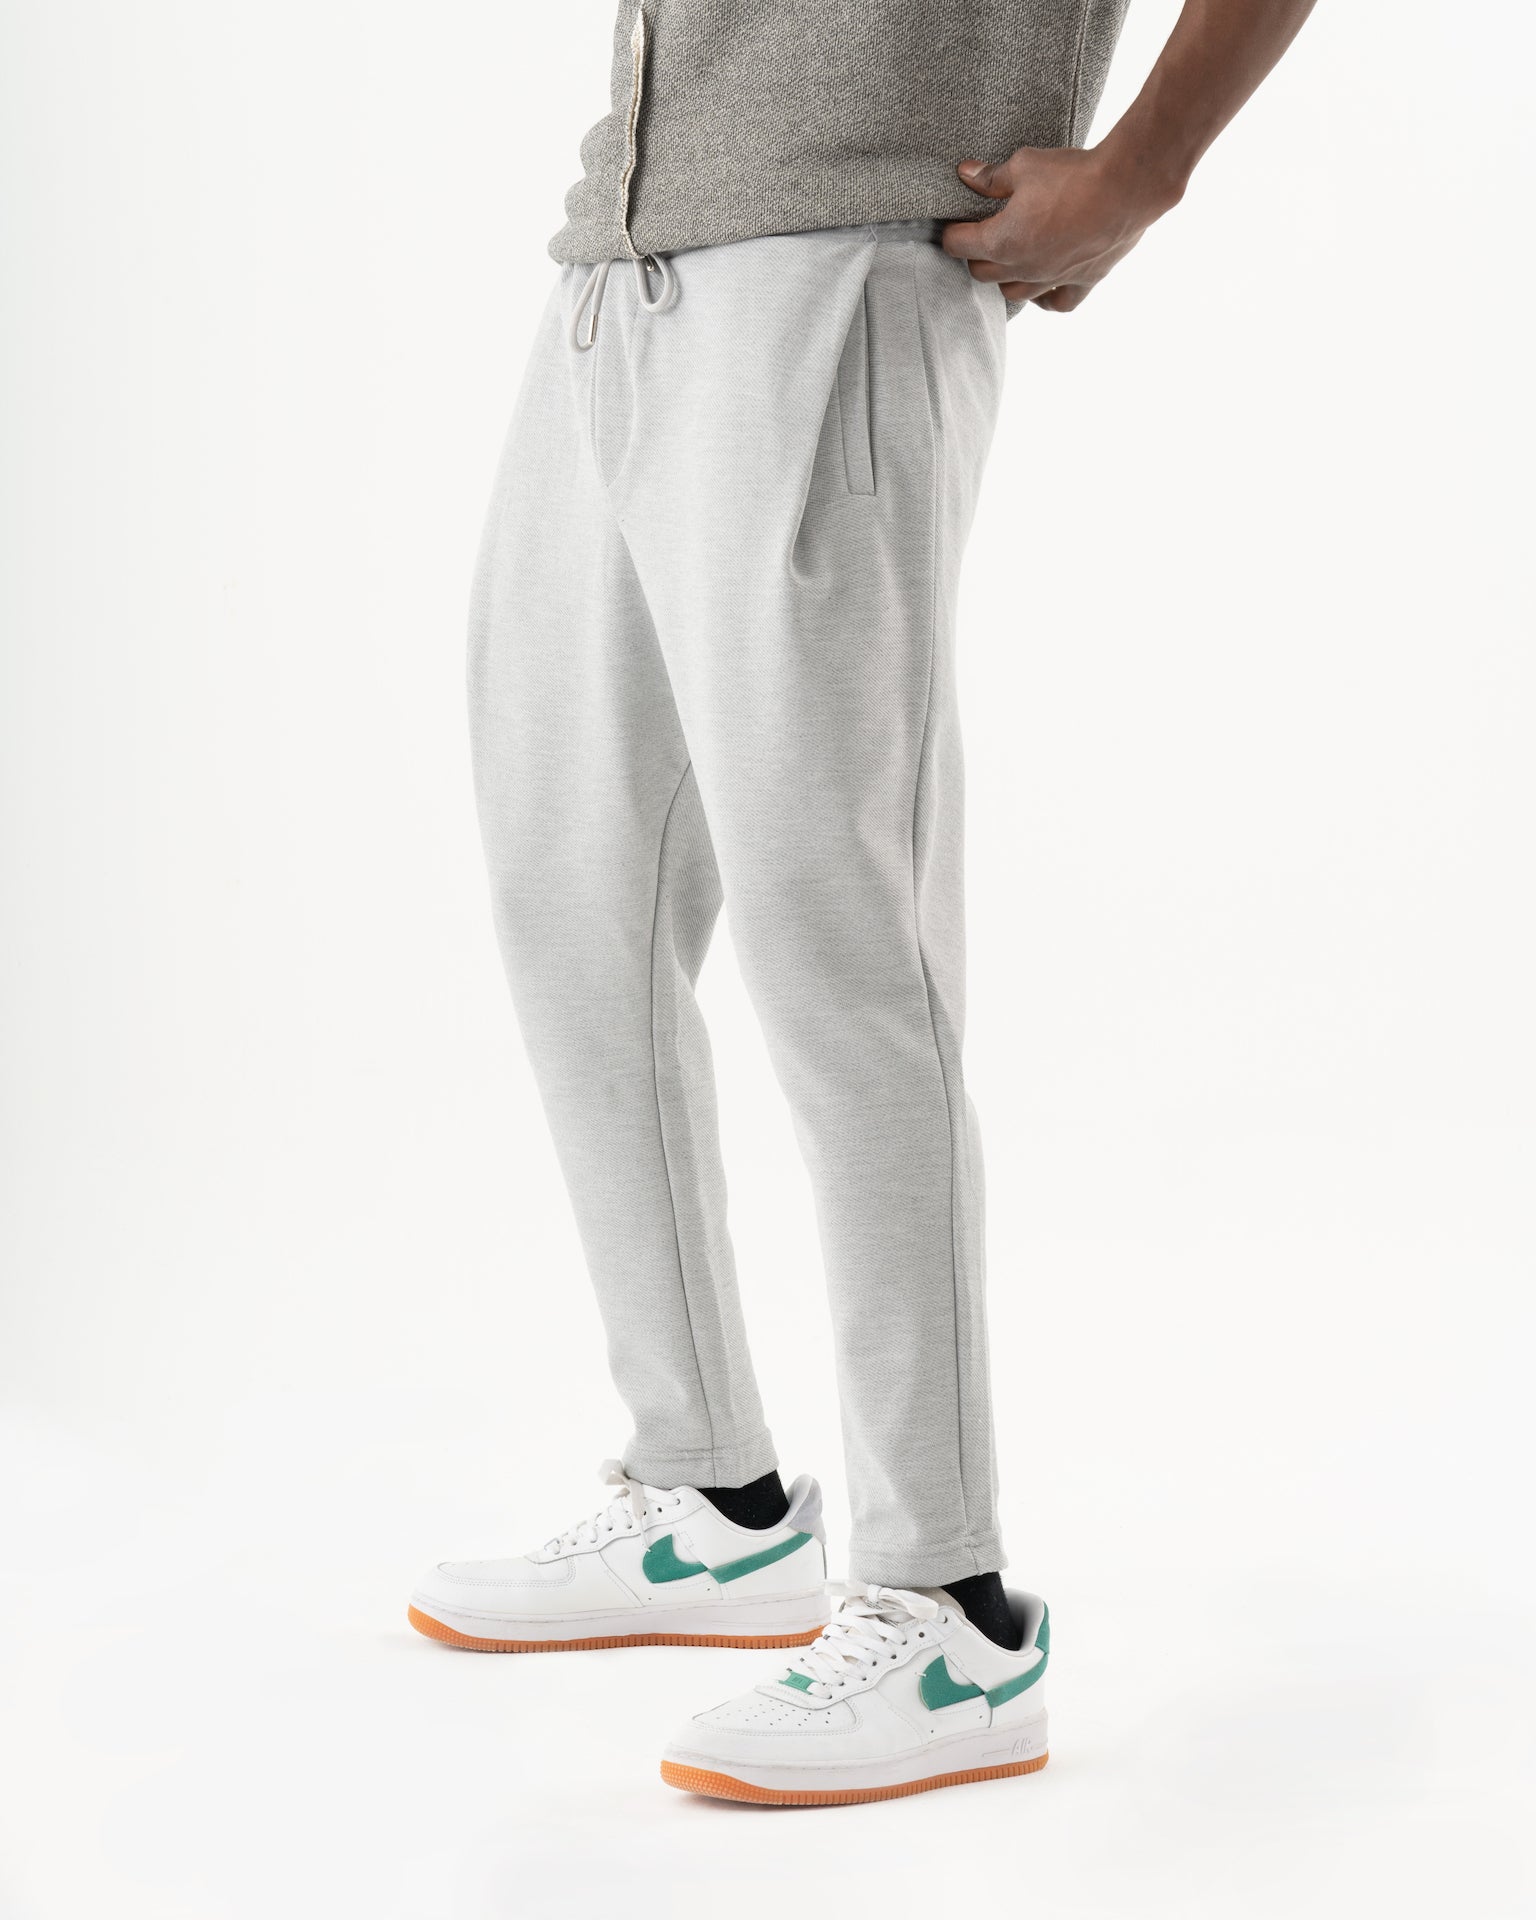 A man in comfortable SERENE joggers is posing for a photo.